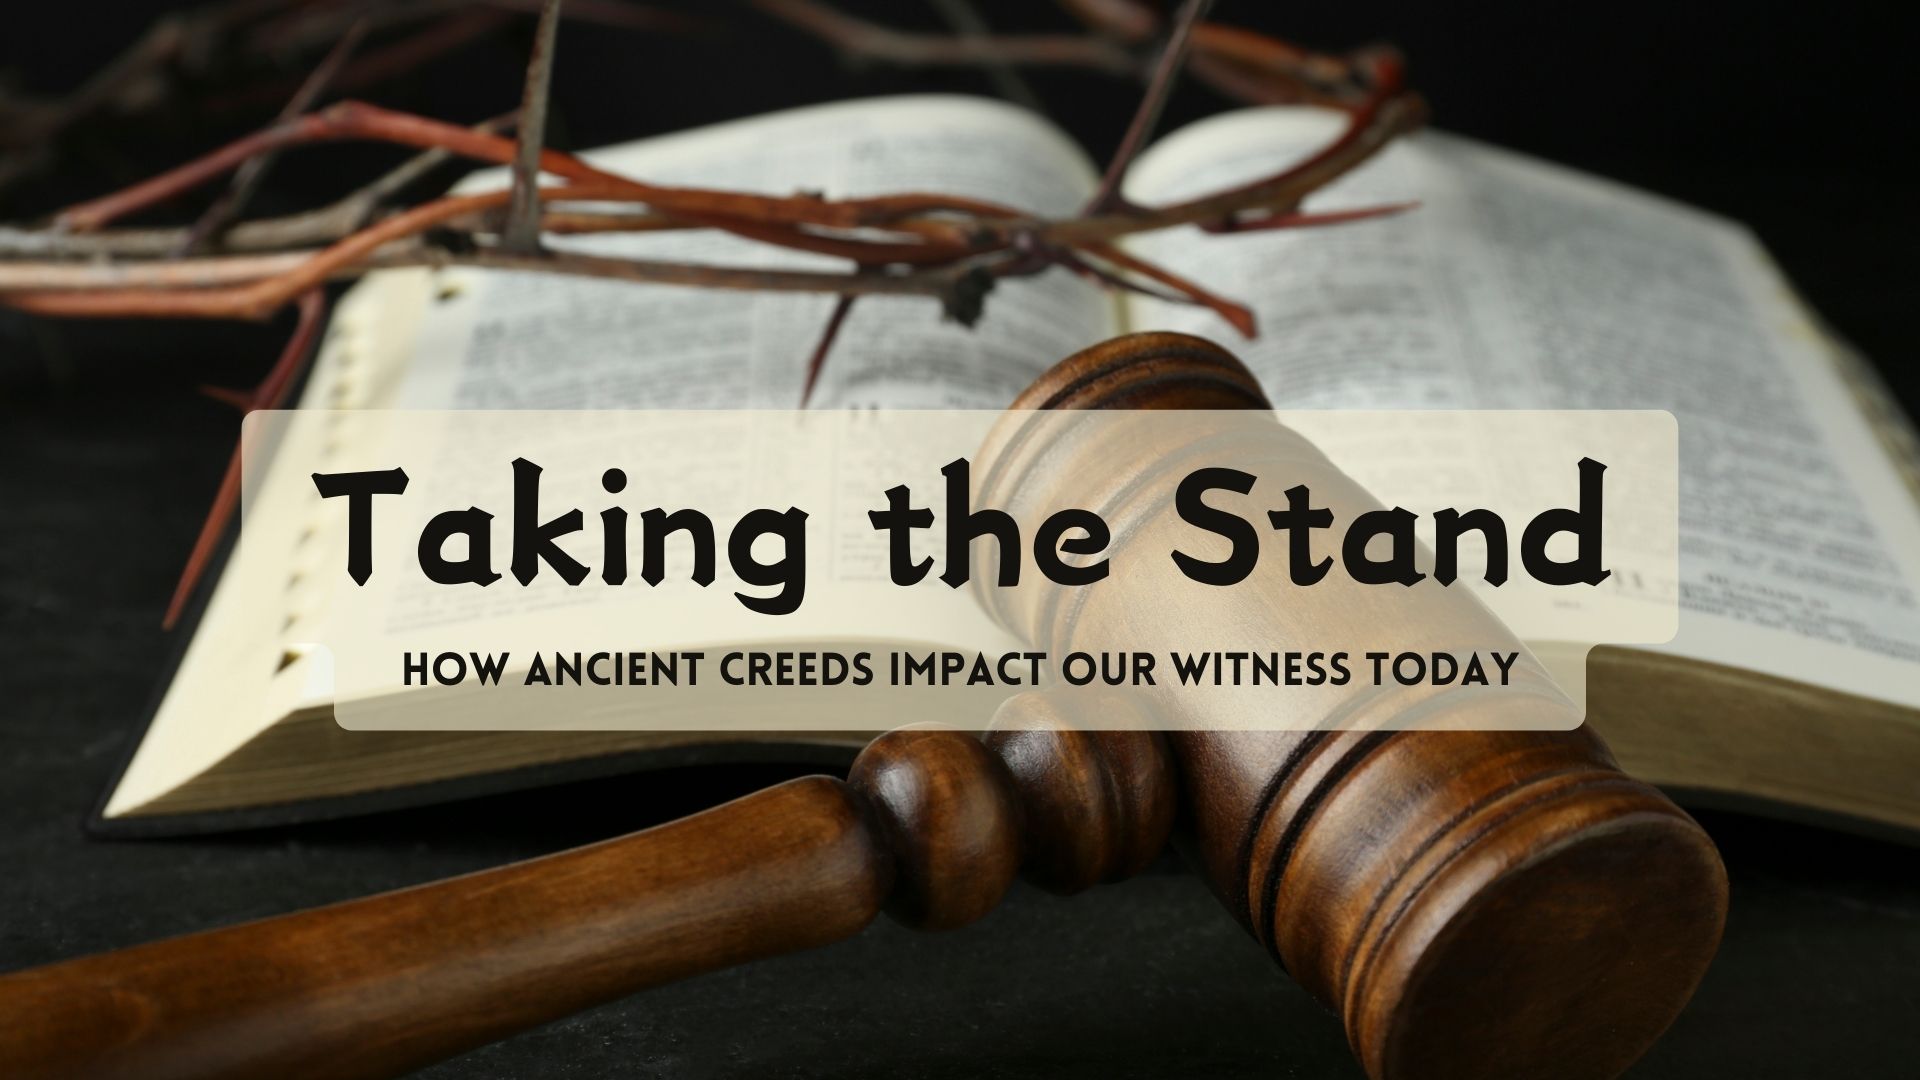 Taking a Stand: For the Glory of God